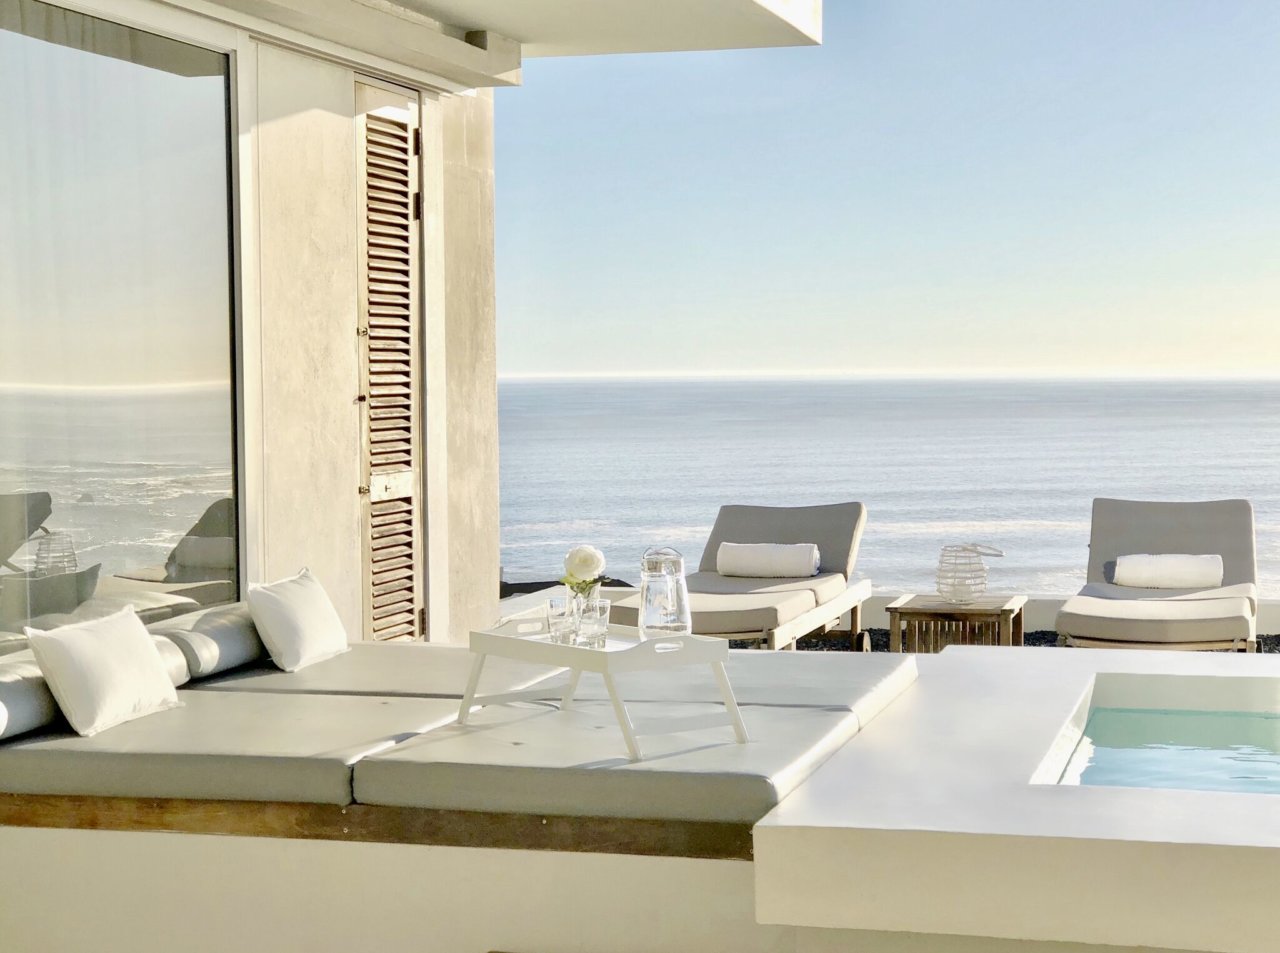 Photo 18 of Aqua Villa accommodation in Camps Bay, Cape Town with 5 bedrooms and 5 bathrooms